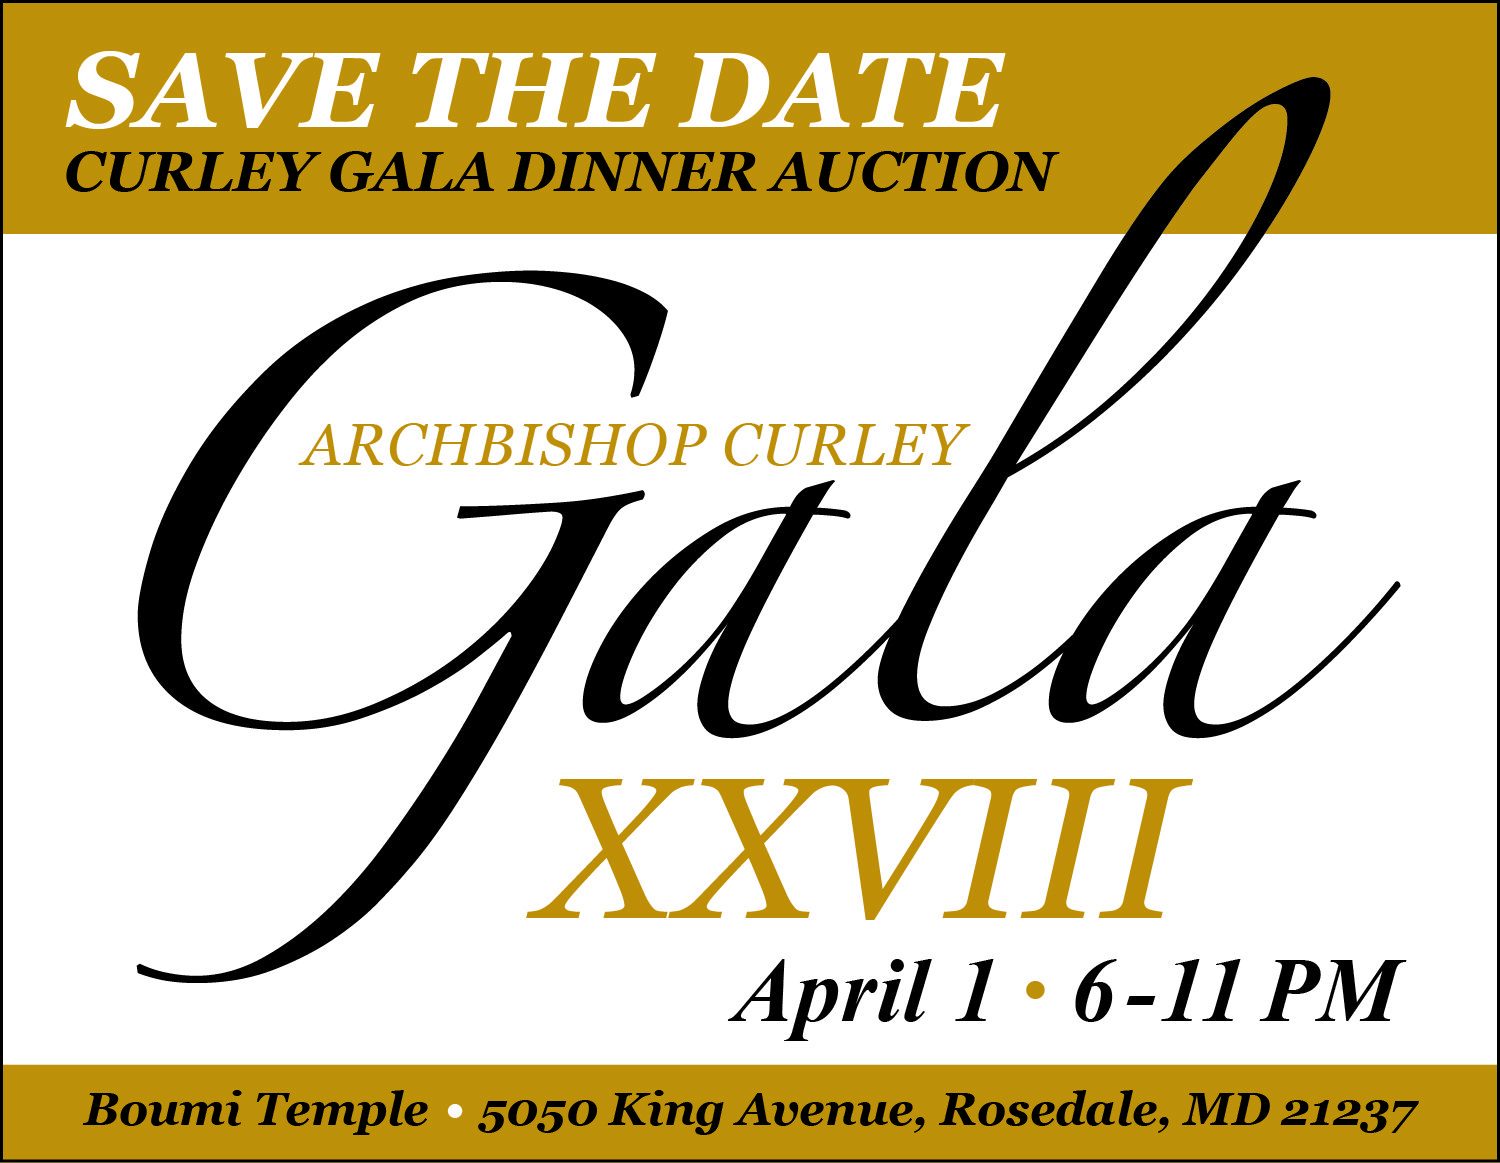 The Curley Gala